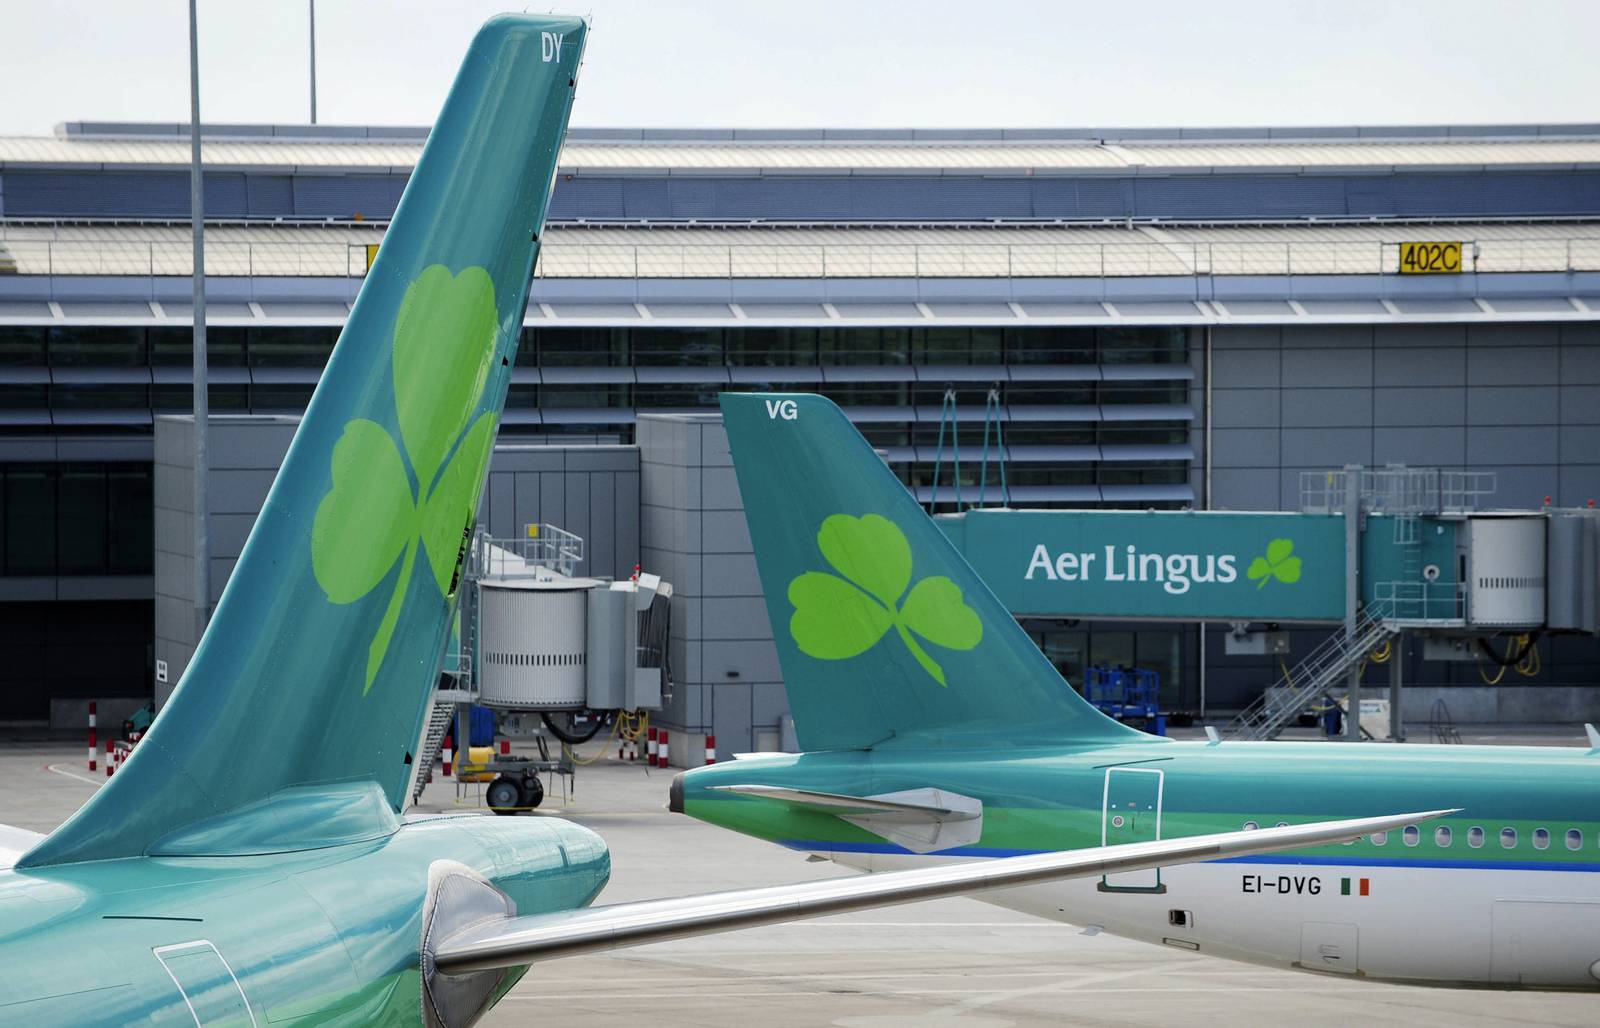 Aer Lingus aircraft, operated by Aer Lingus Group Plc, pass each other at Dublin Airport in Dublin, Ireland, on Thursday, June 9, 2011. Aer Lingus Group Plc's total booked passenger numbers rose 4 percent to 911,000 in May from the year earlier. Photographer: Aidan Crawley/Bloomberg